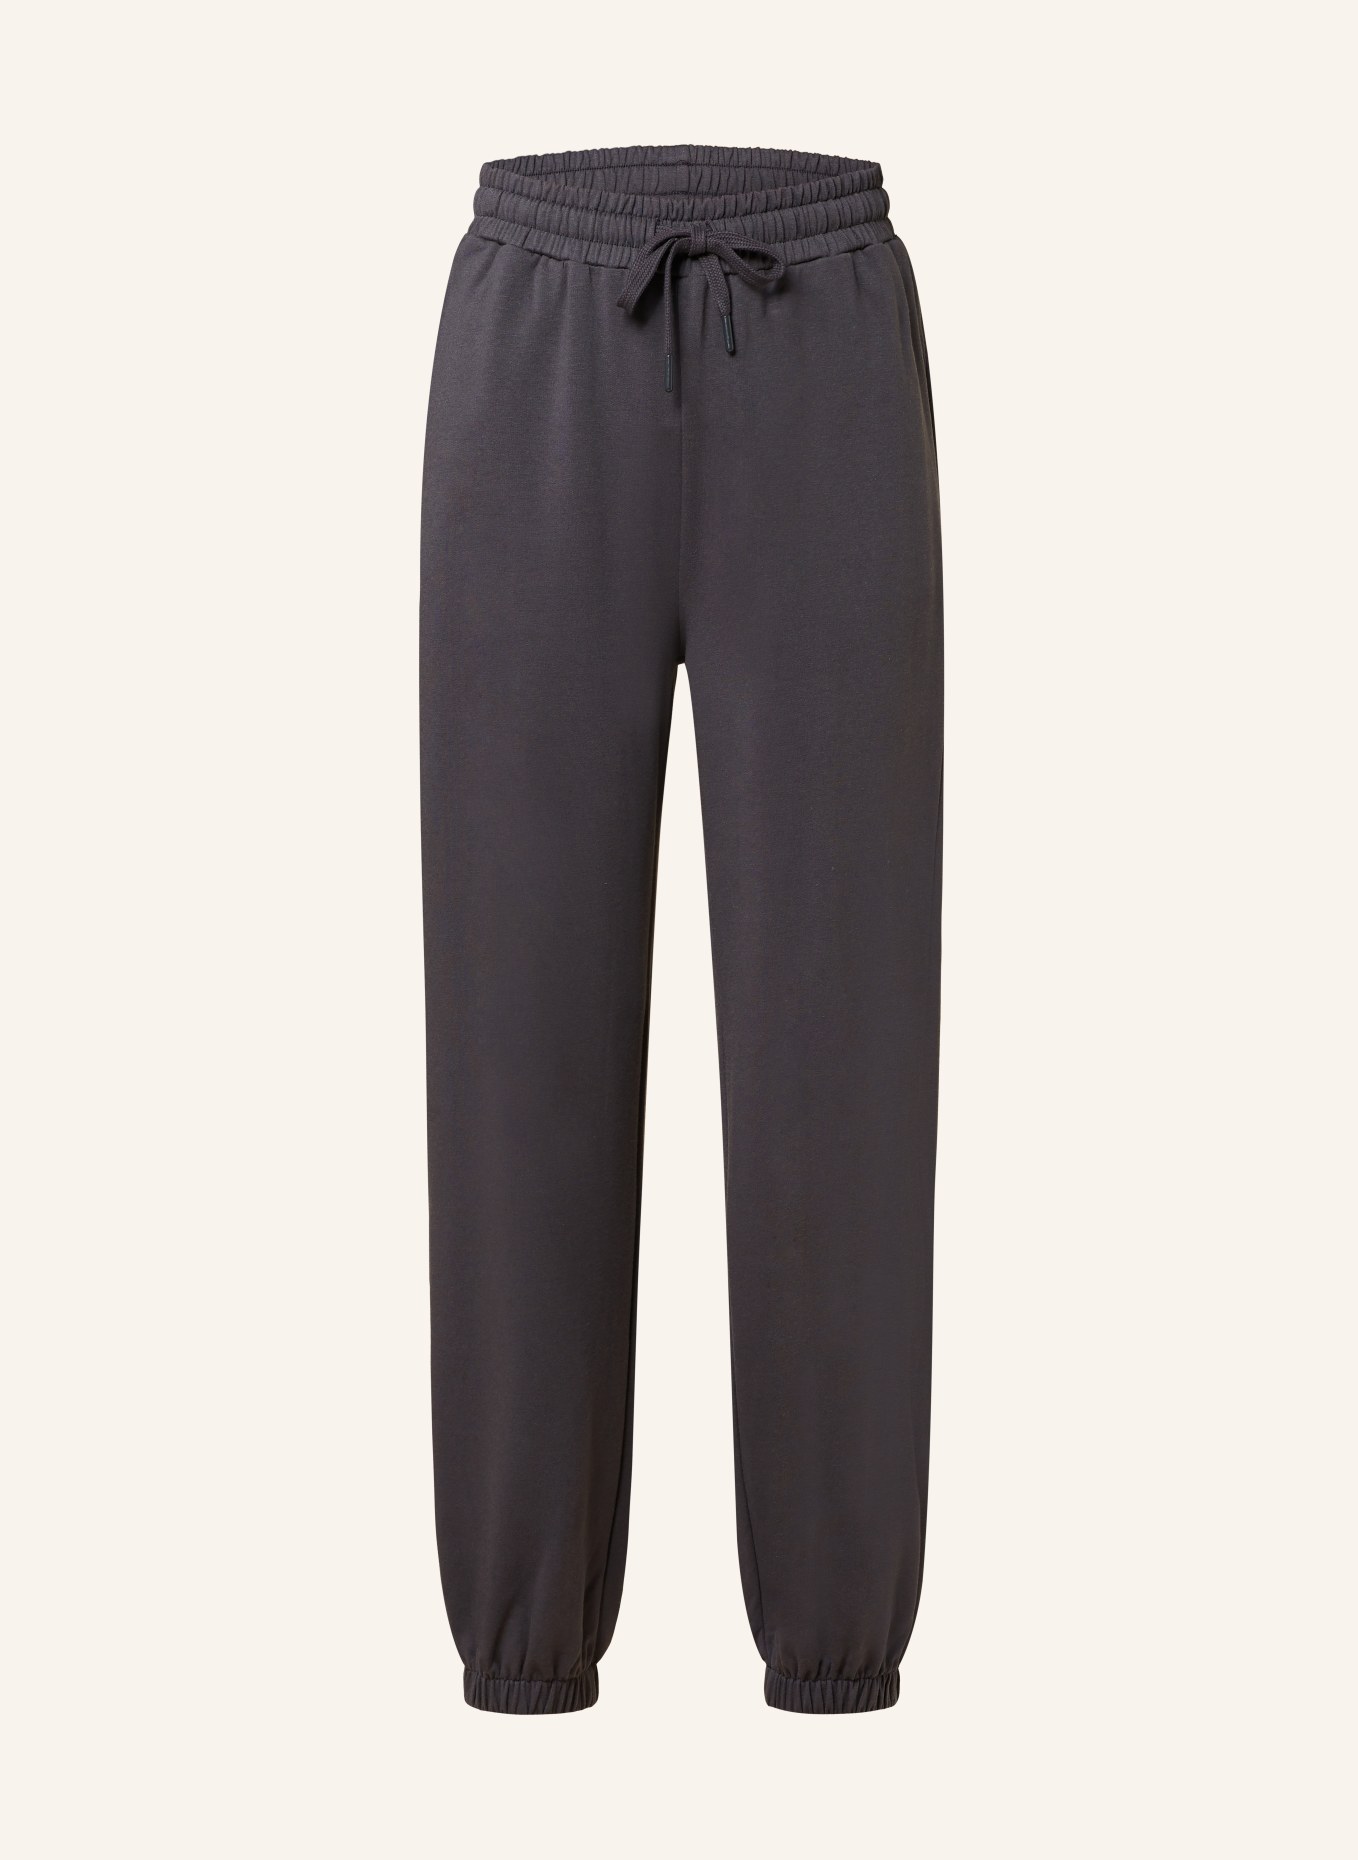 mey Lounge pants series ROSE, Color: GRAY (Image 1)